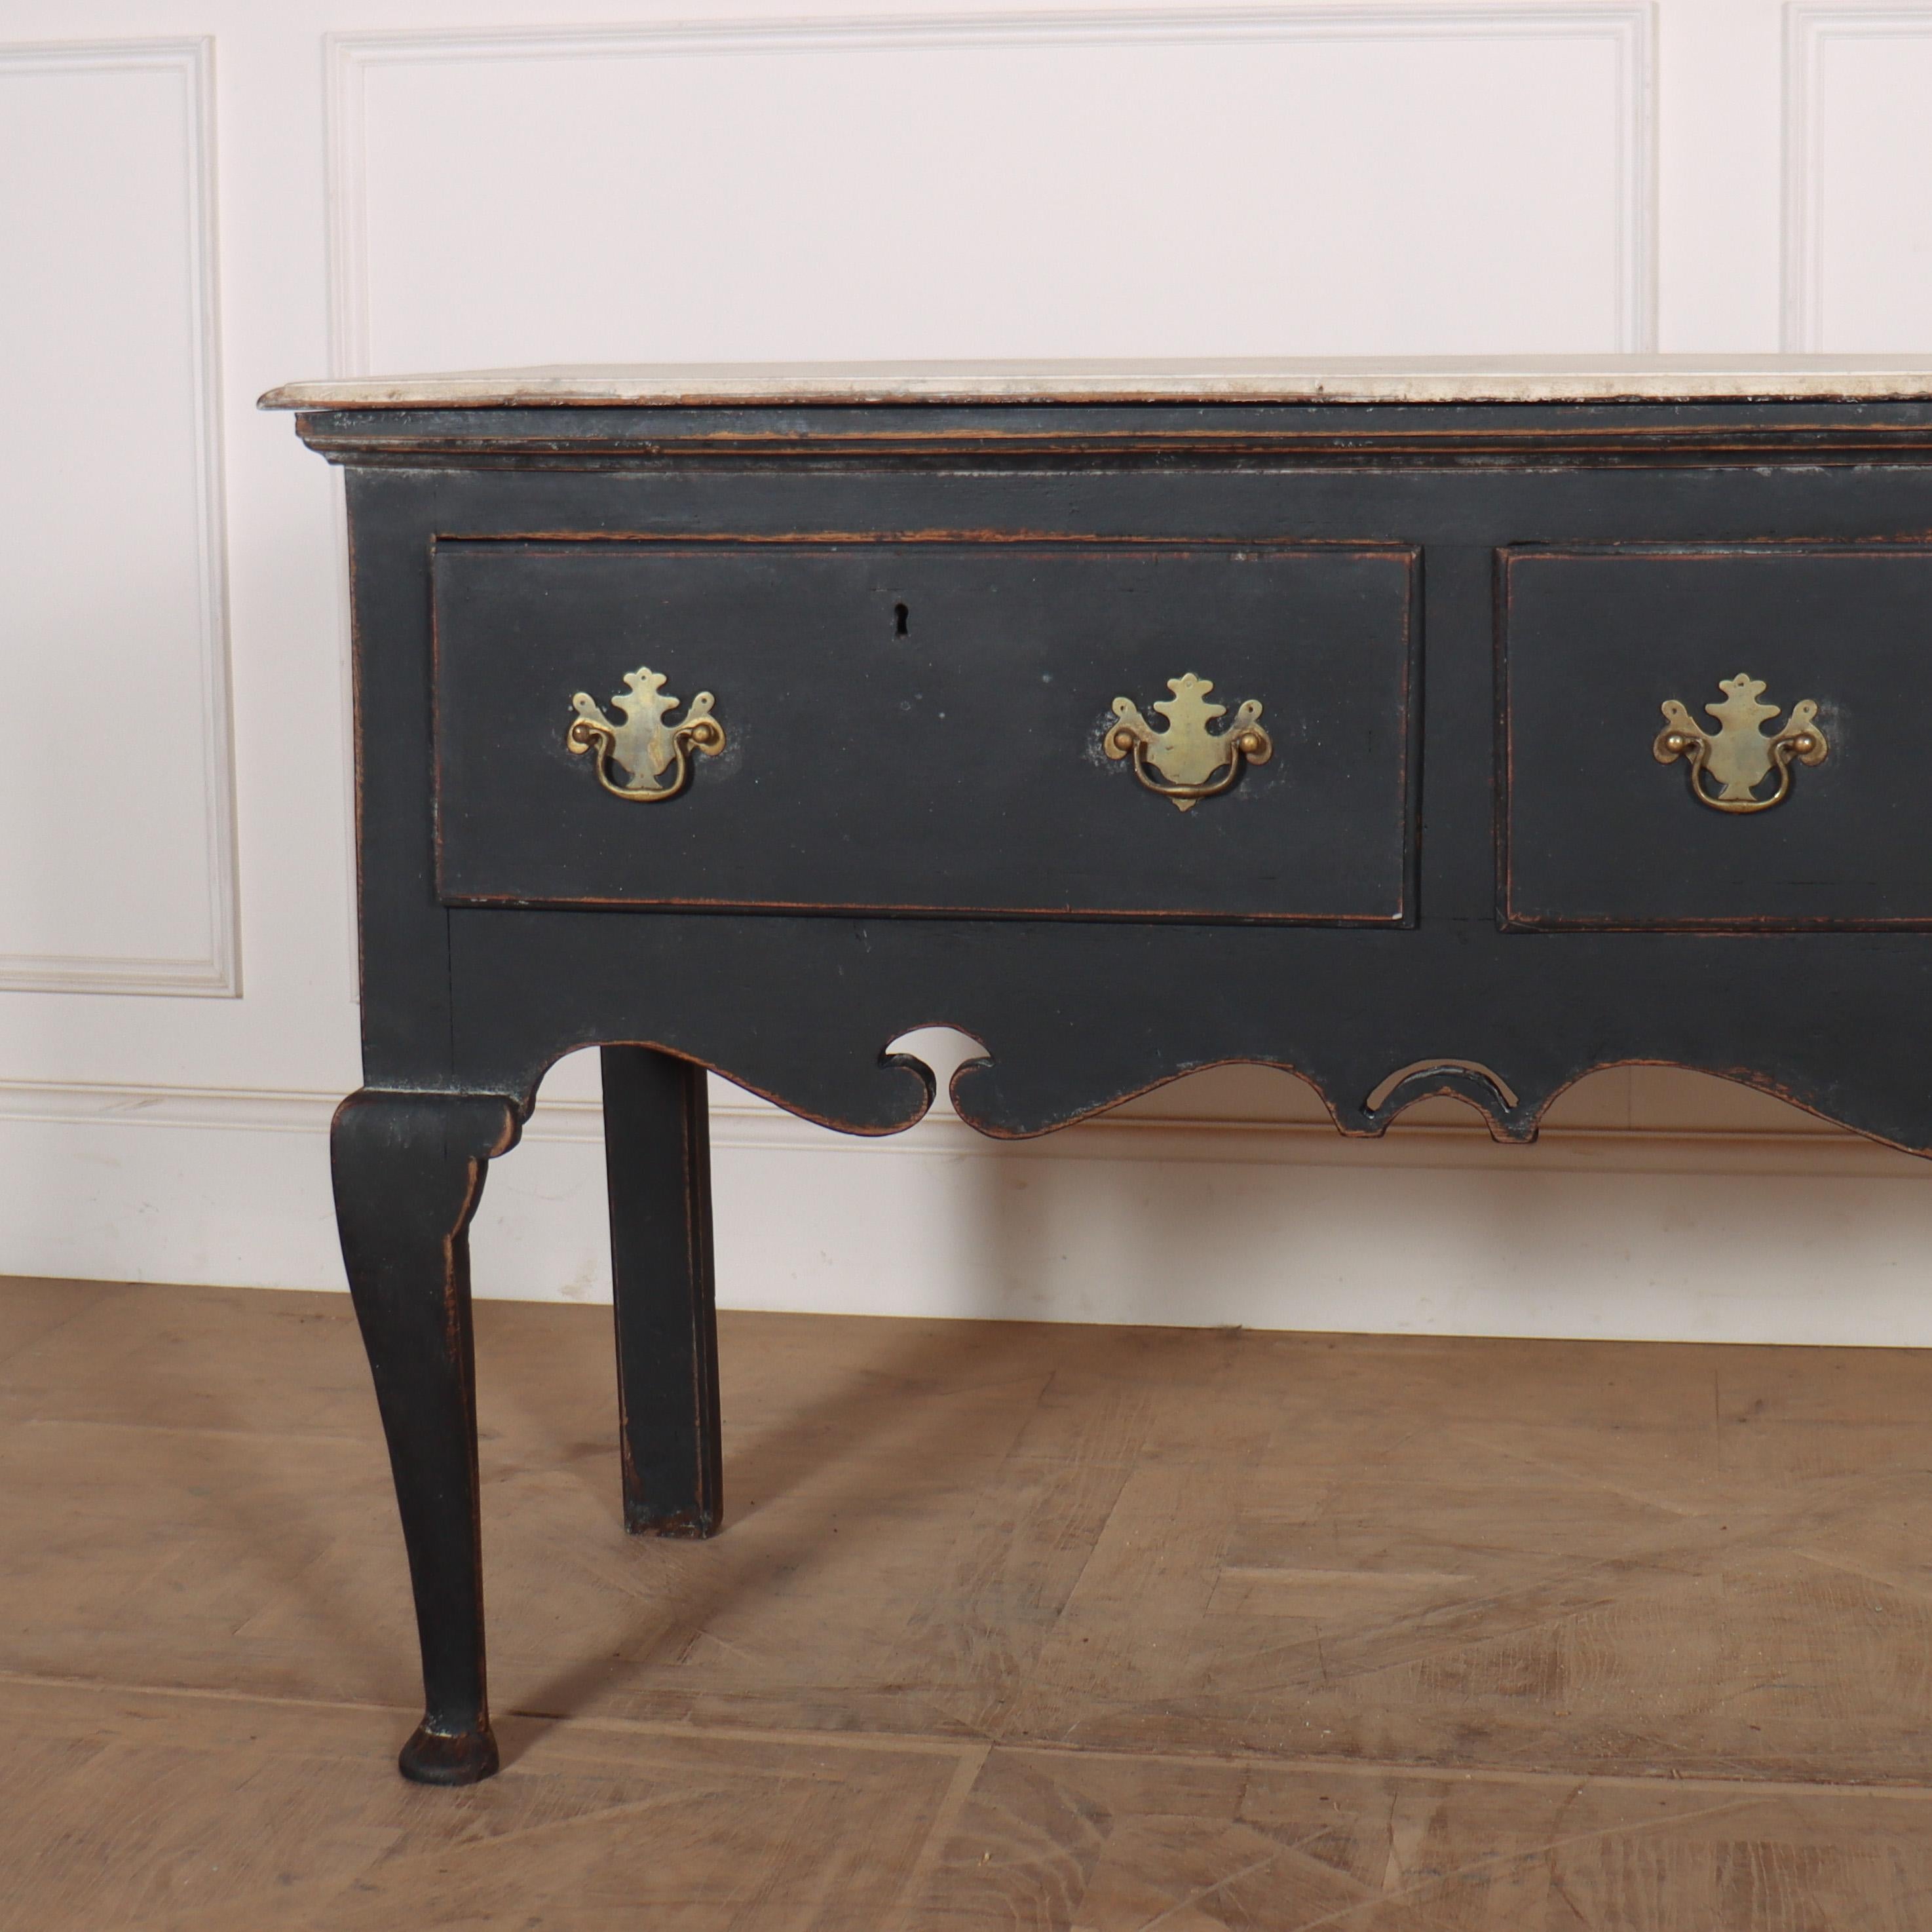 18th C English painted oak dresser base with a faux marble top. 1760.

Reference: 8044

Dimensions
72 inches (183 cms) Wide
19 inches (48 cms) Deep
31 inches (79 cms) High